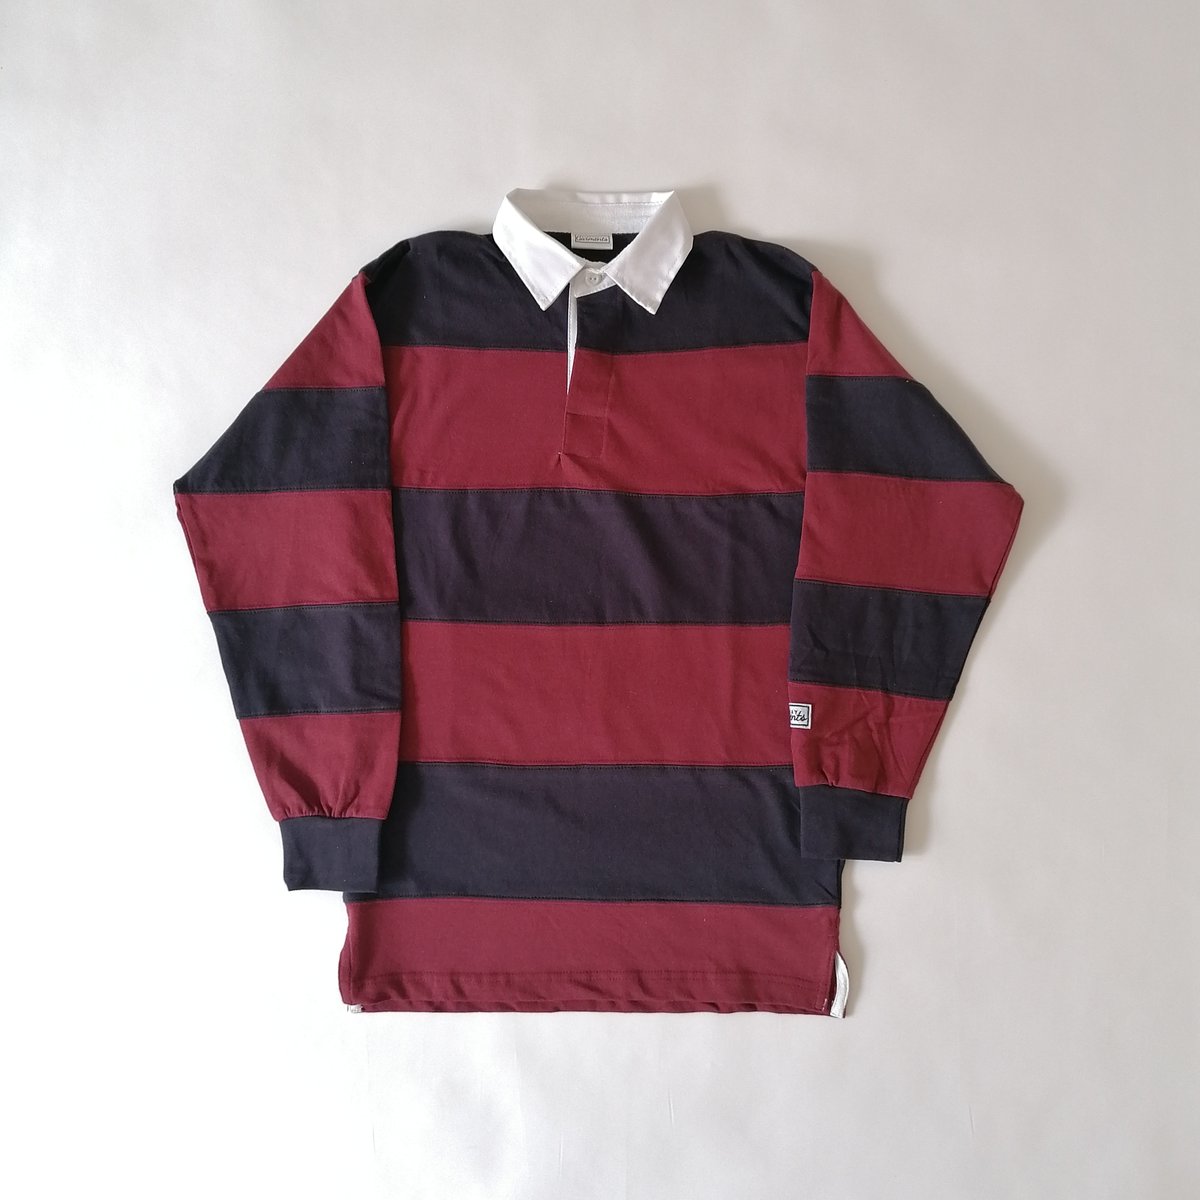 Image of EVERYDAY GARMENTS STRIPE JERSEY TOP